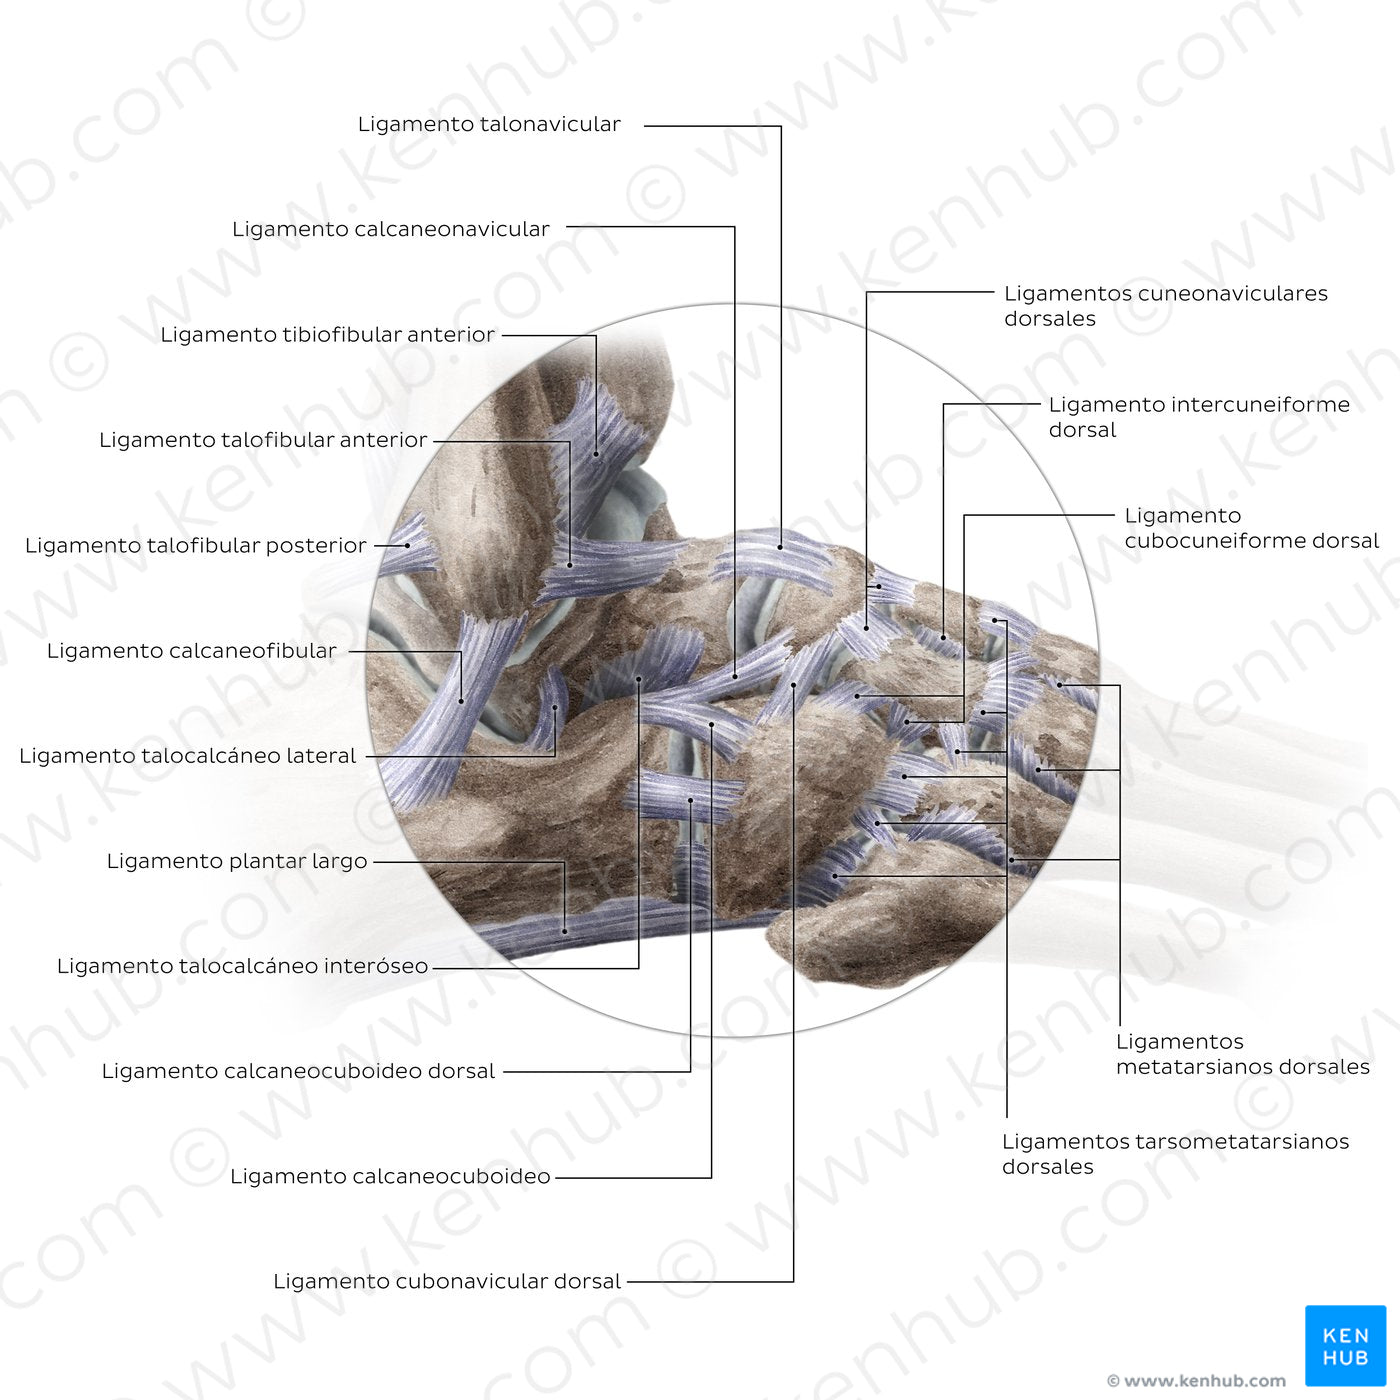 Ligaments of the foot (lateral view) (Spanish)